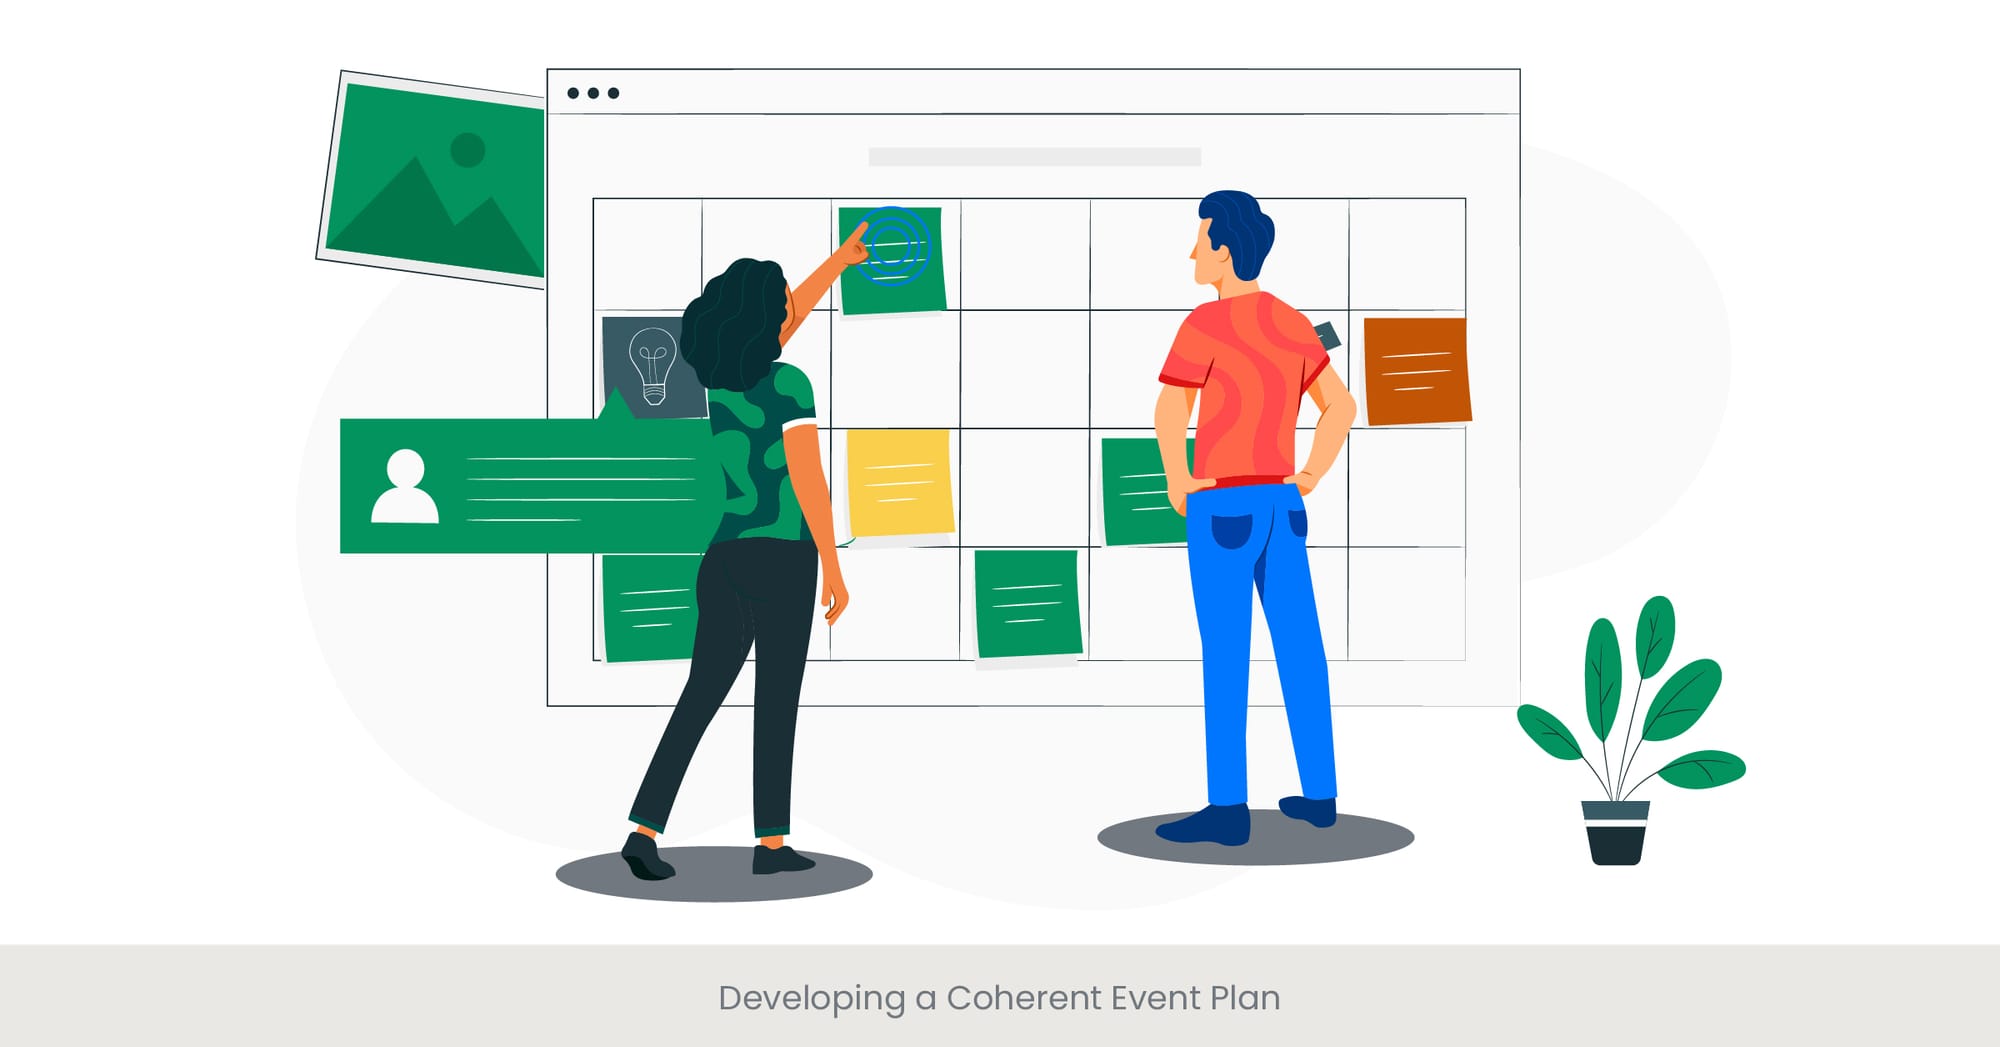 Developing a Coherent Event Plan